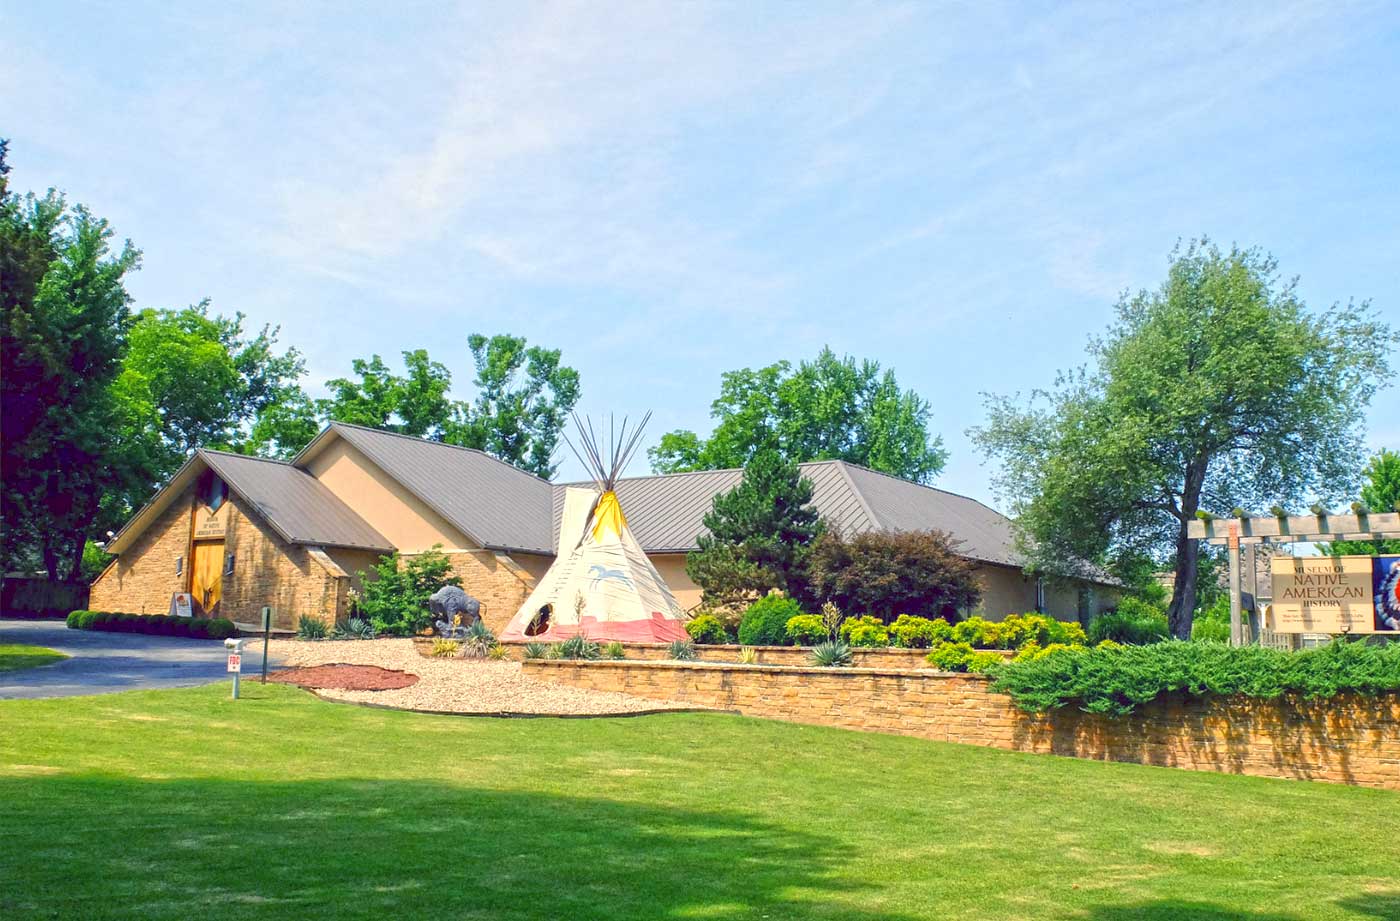 Museum of Native American History (MONAH)